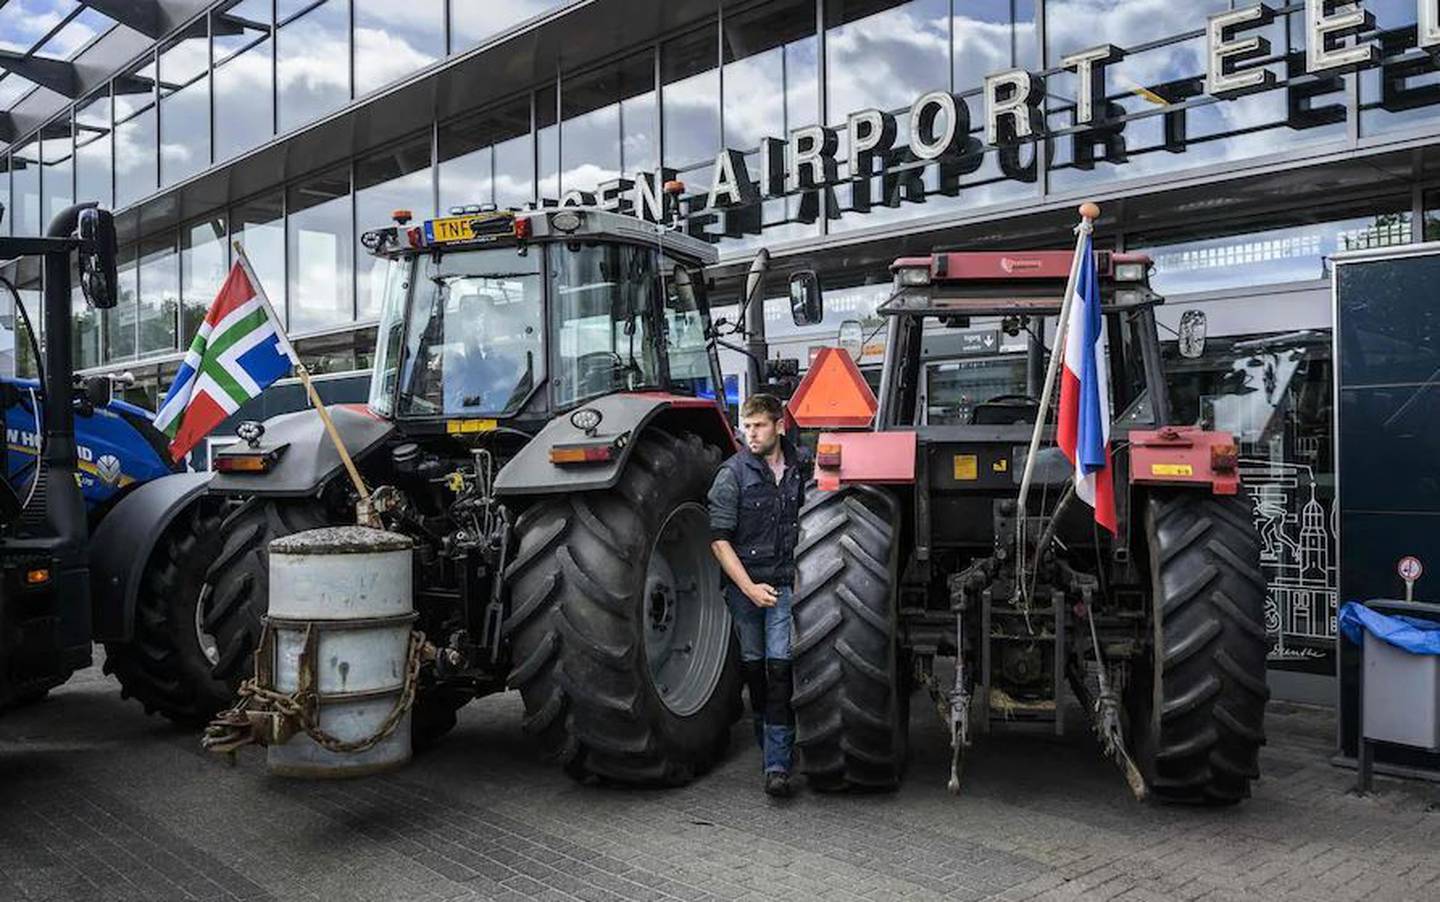 Farmers blocked the entrance to Groningen Airport. Photo / Getty Images